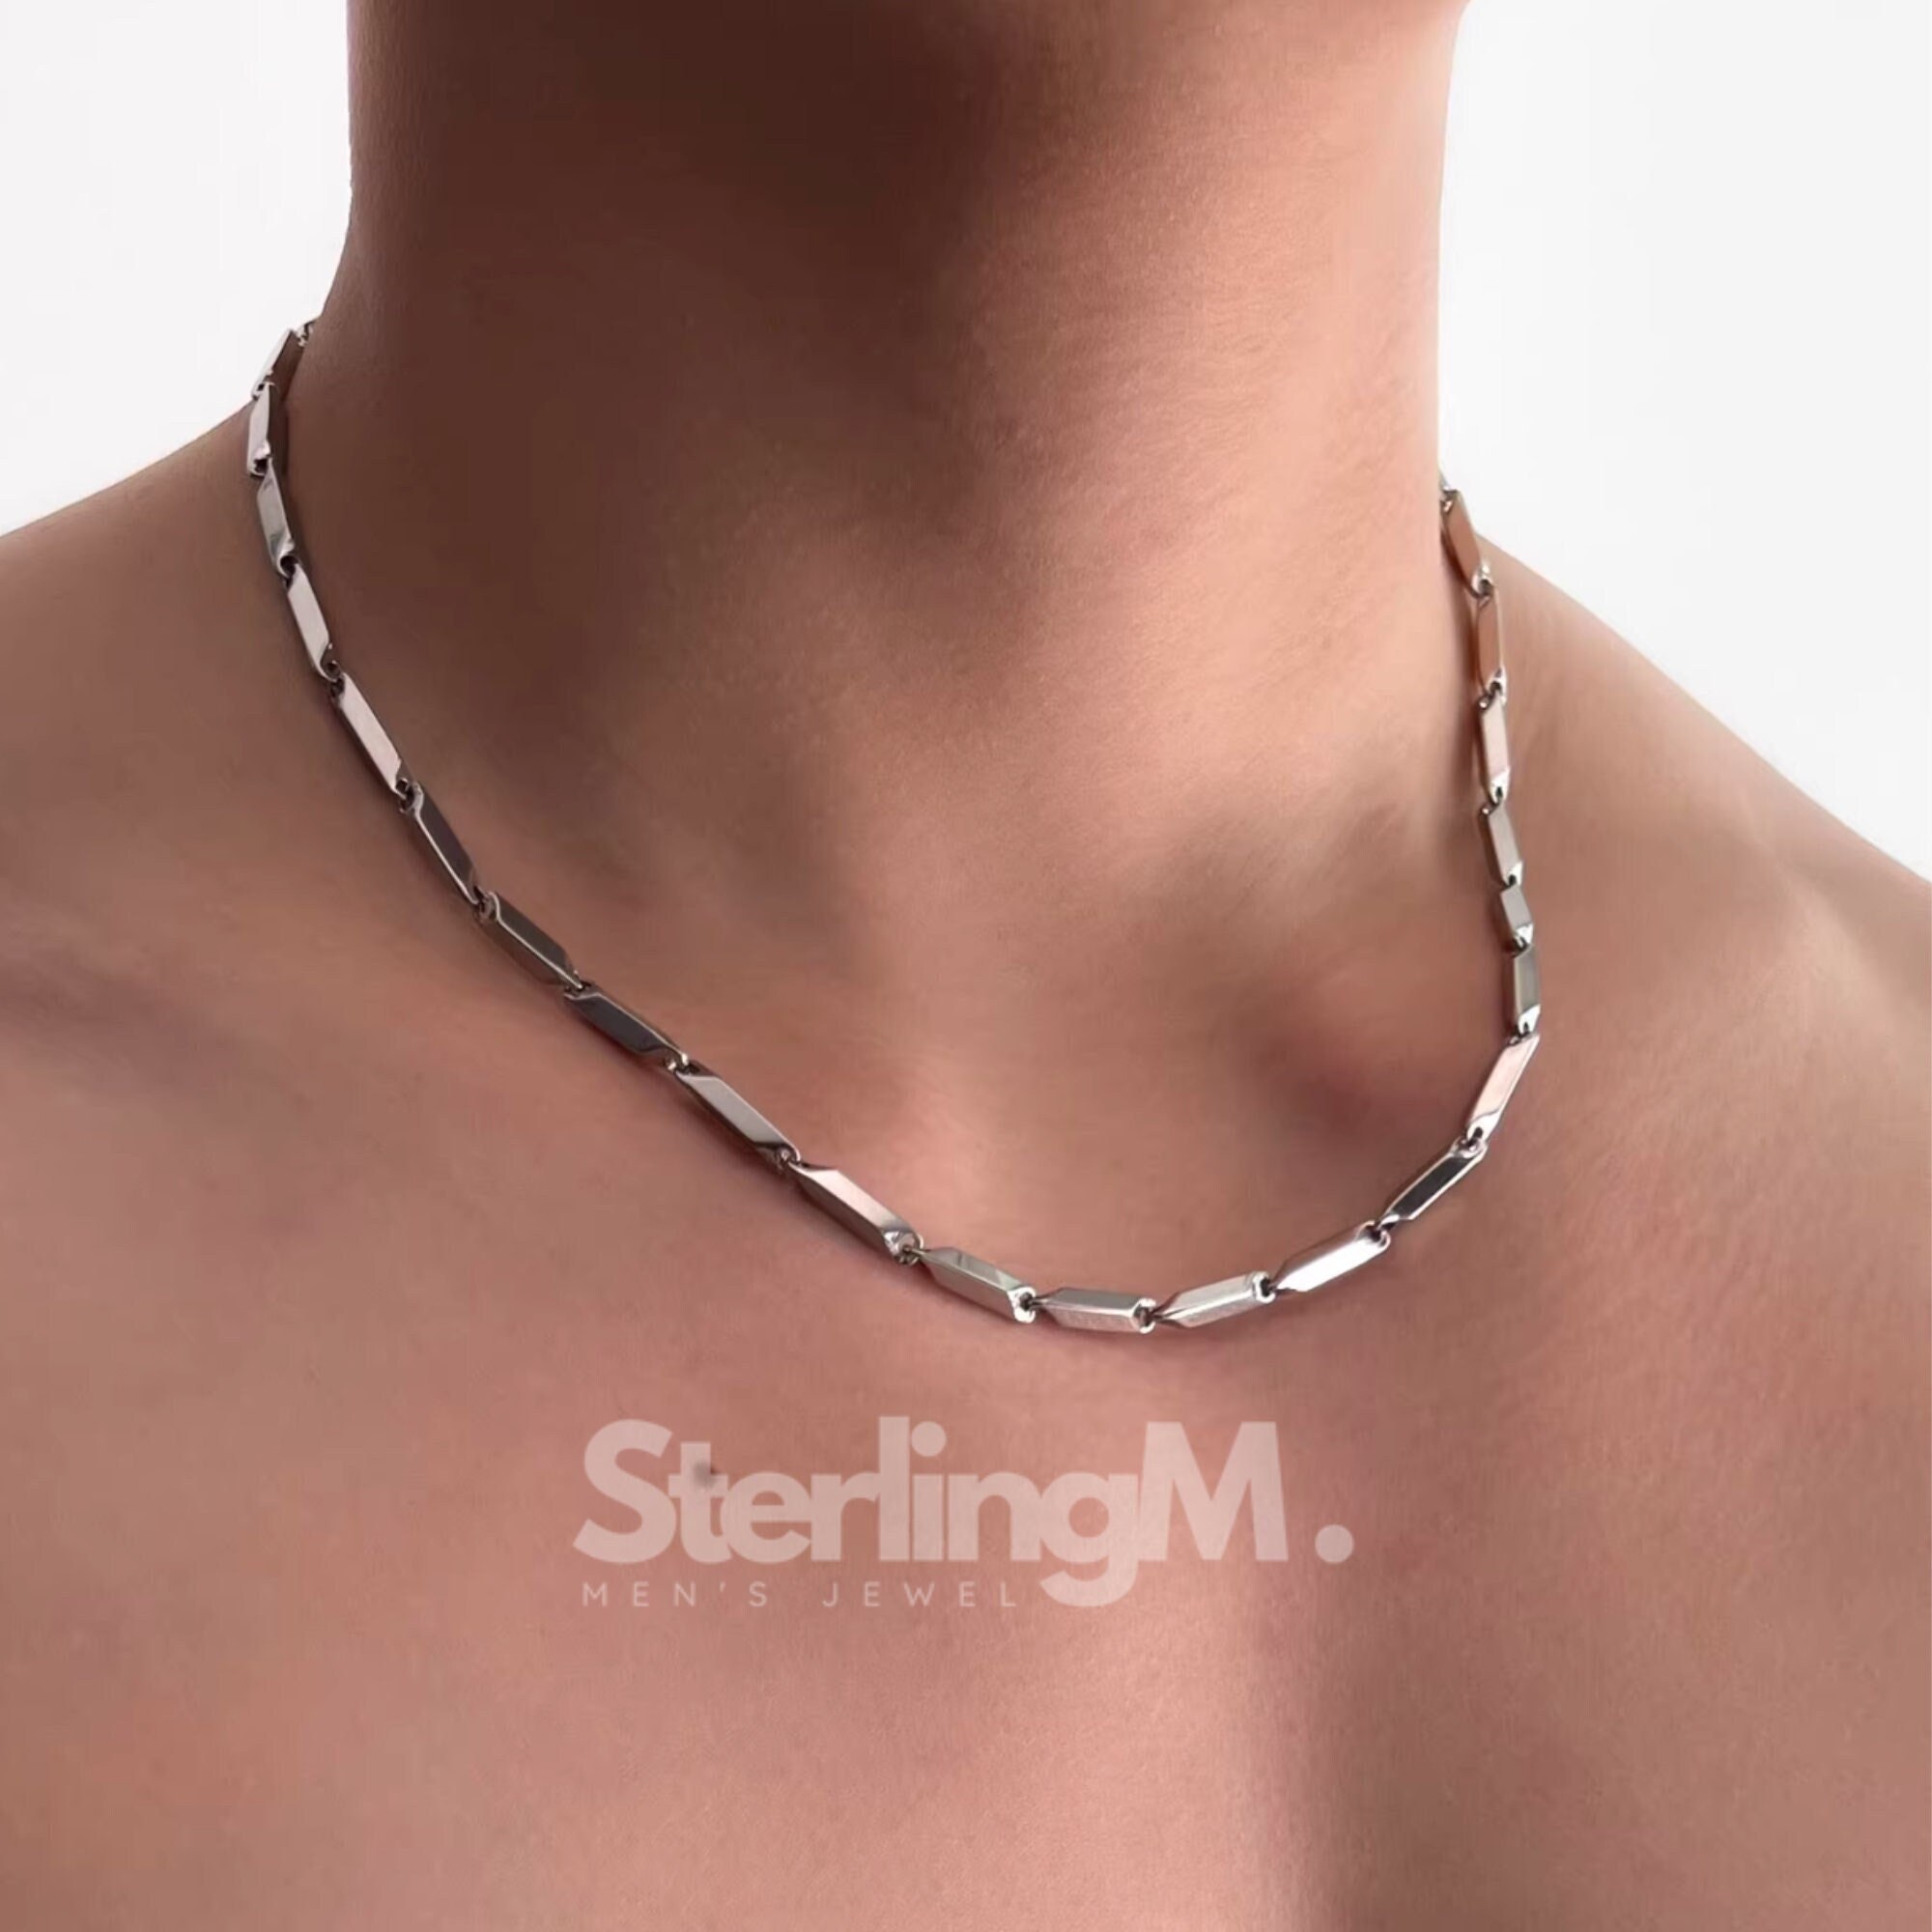 A Mens Choker Necklace That Actually Fits – Authentic Arts Men's Jewelry